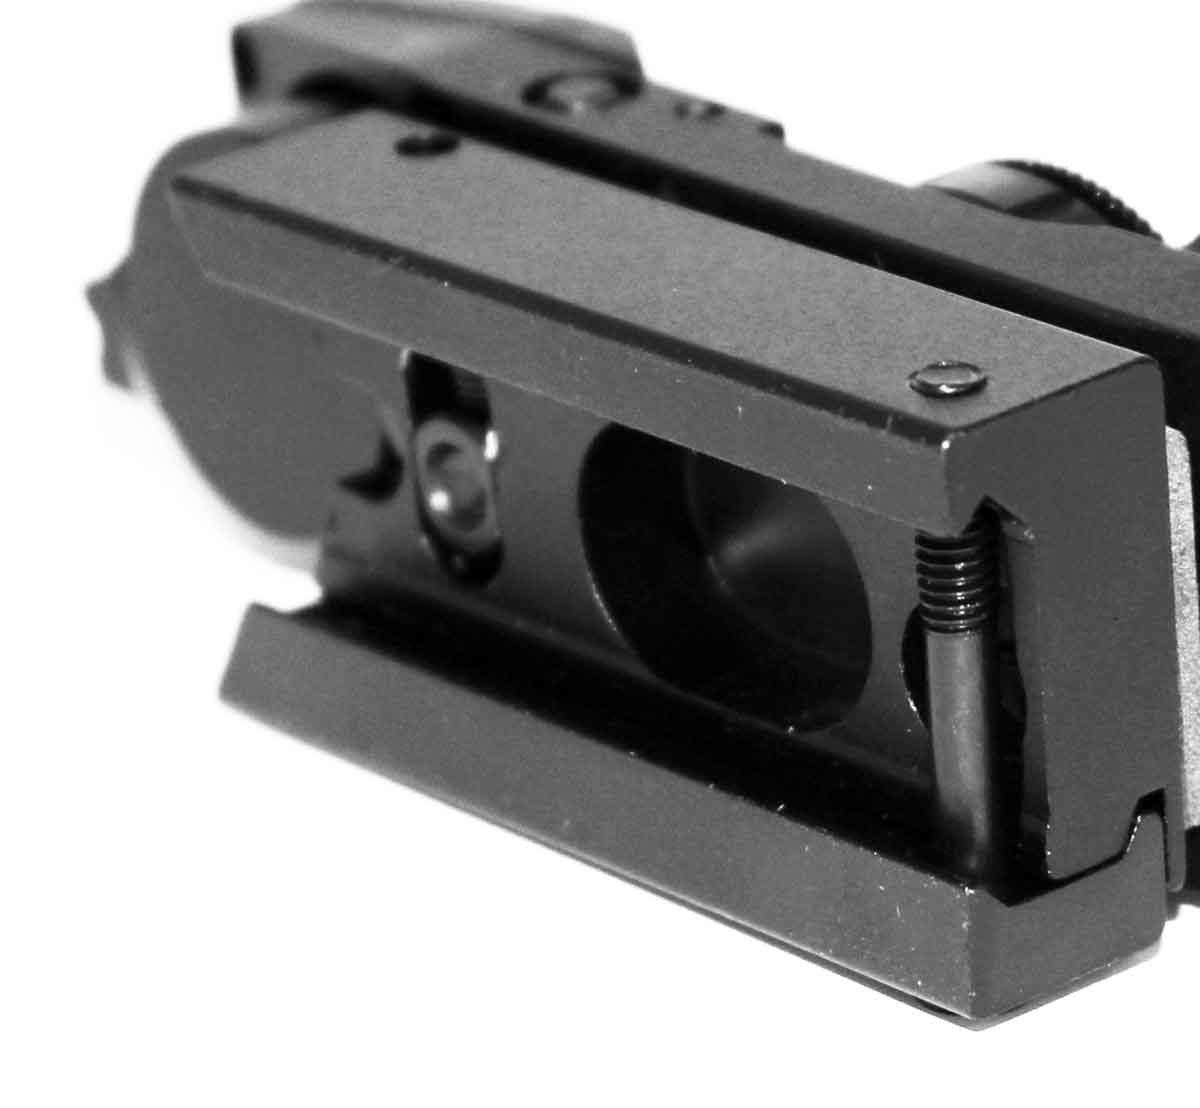 reflex sight for ruger mini 14 rifle.